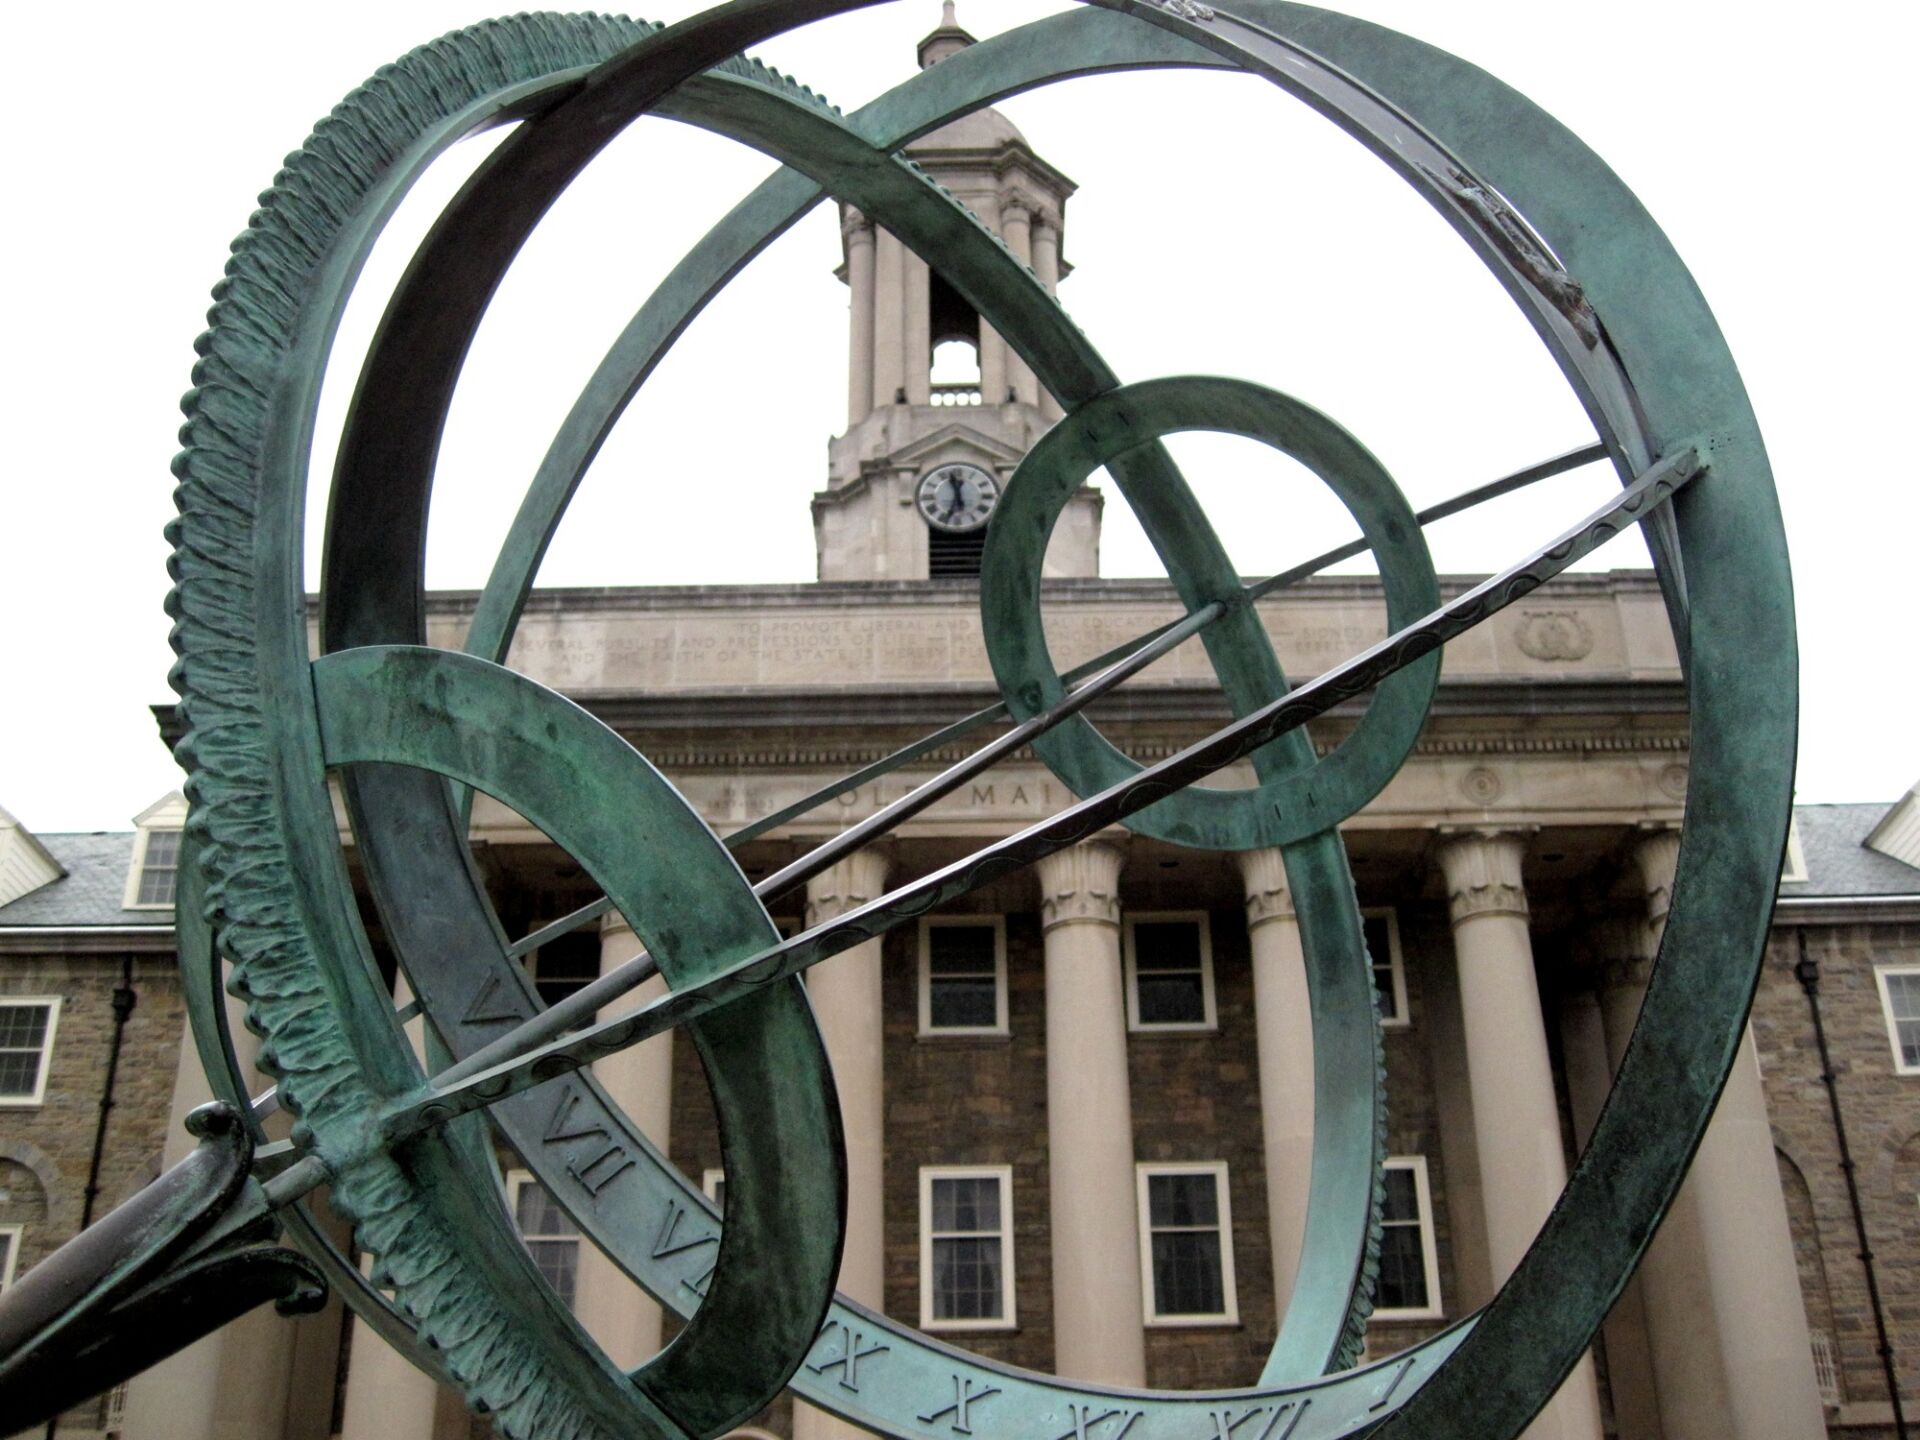 Bronze with patina orbit sculpture in focus with Old Main in background, white sky.